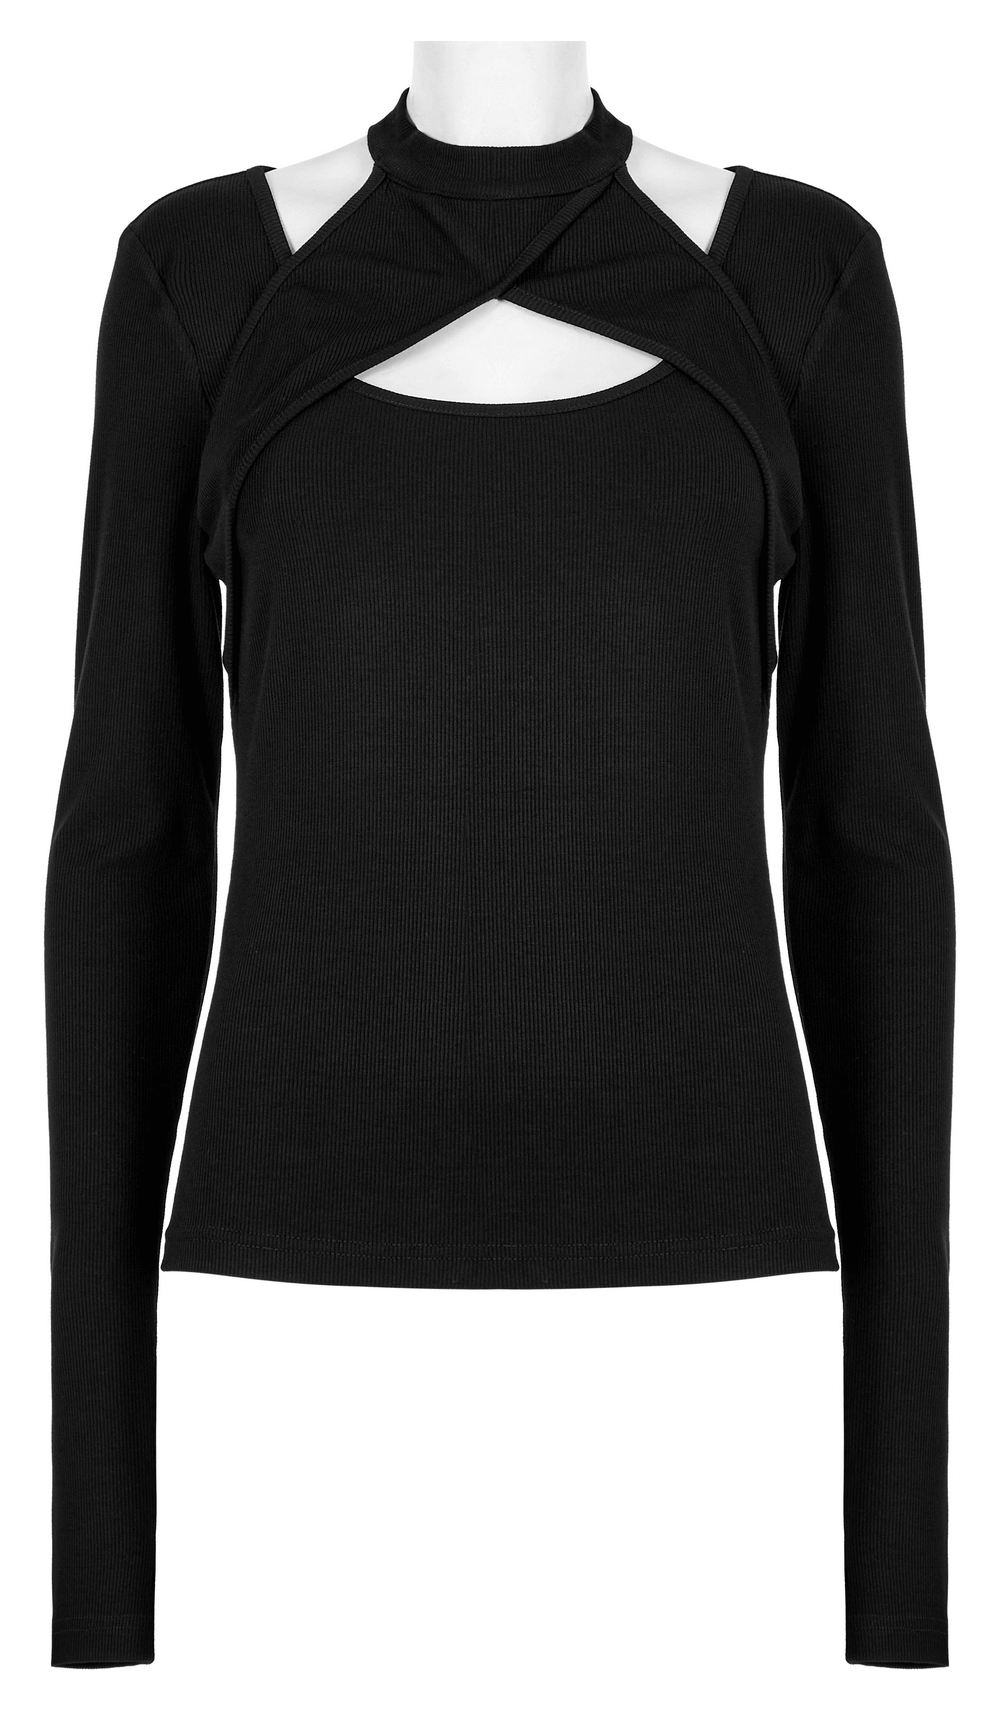 Stylish Gothic Black Long Sleeve Cut Out Crop Top